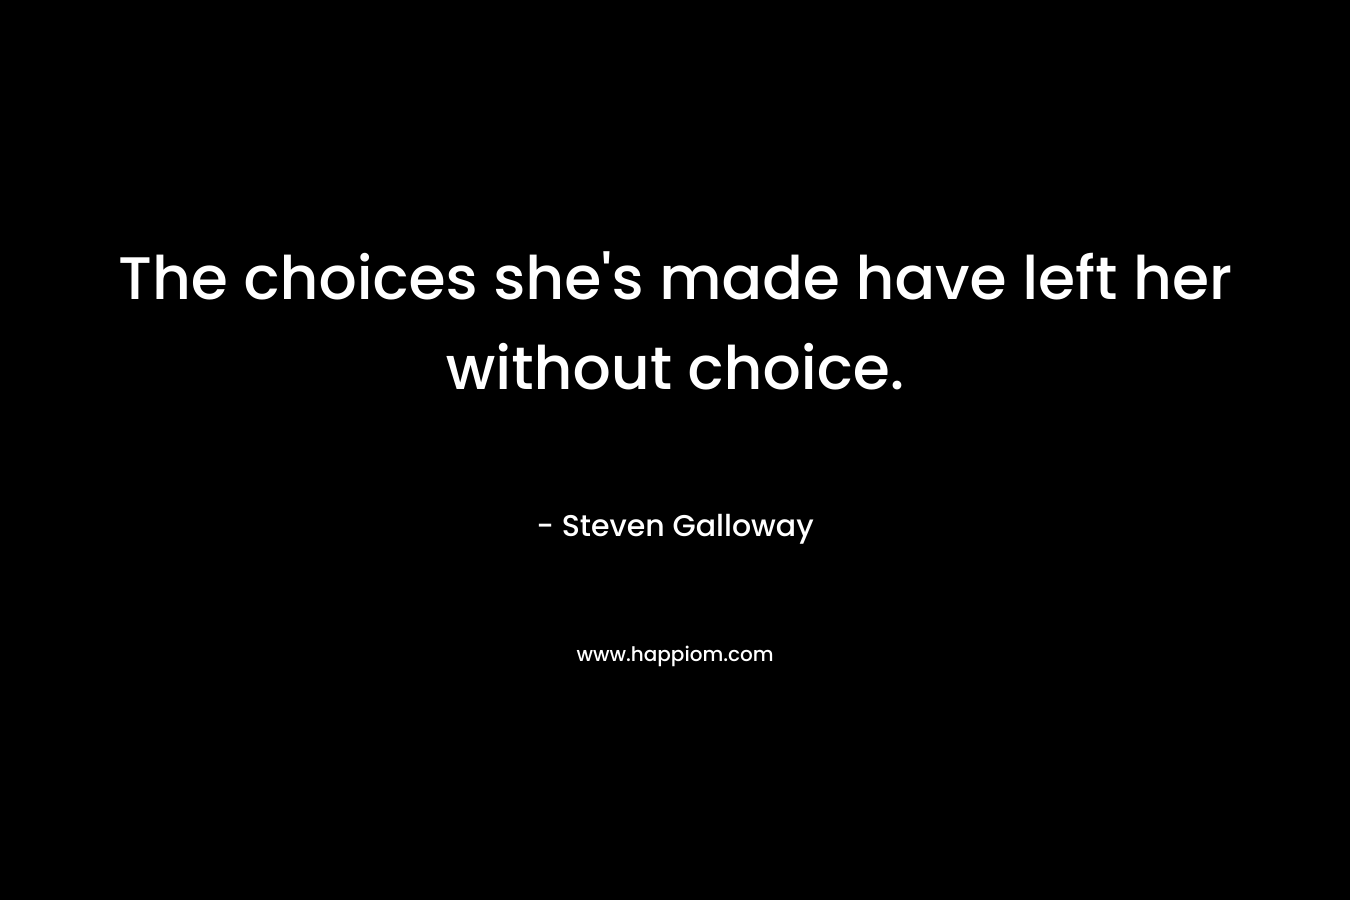 The choices she’s made have left her without choice. – Steven Galloway